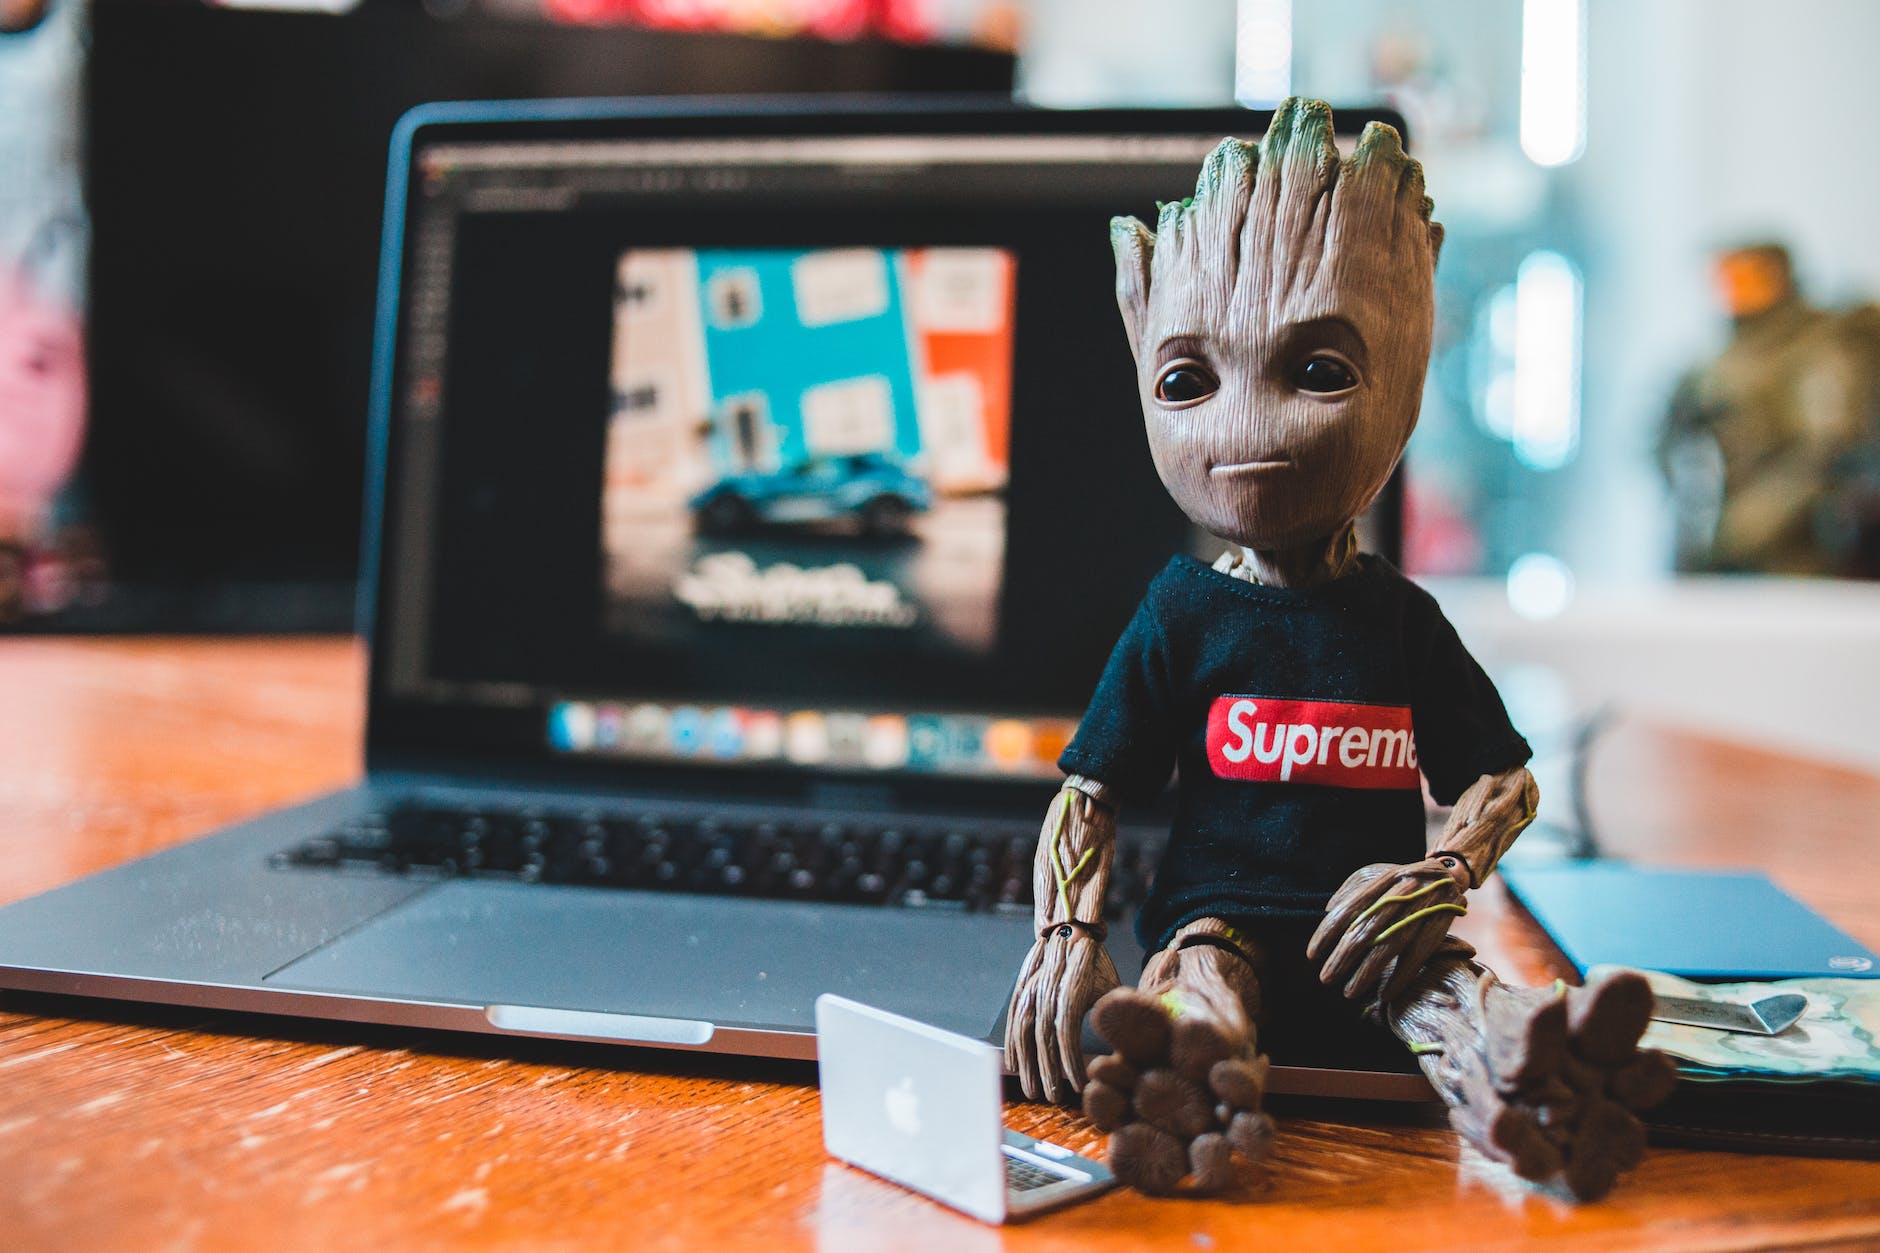 Groot action figure next to laptop.